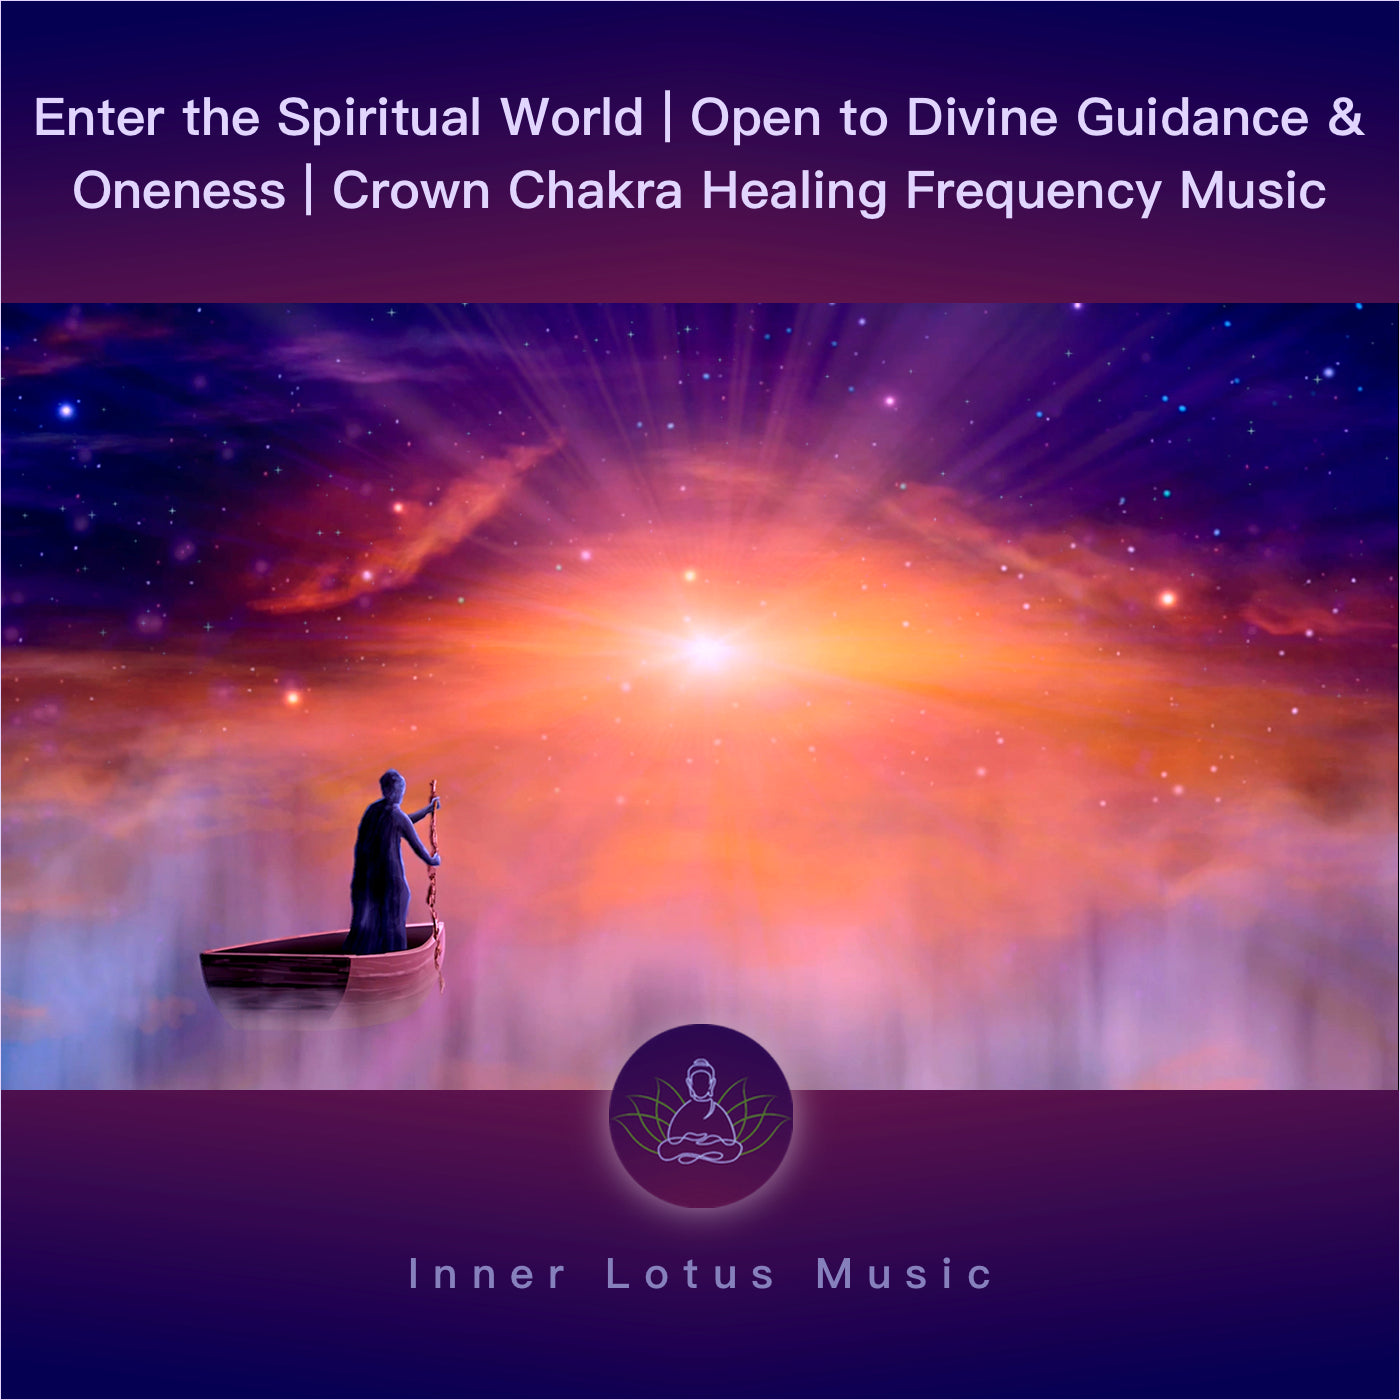 Enter the Spiritual World | Open to Divine Guidance & Oneness | Crown Chakra Healing Frequency Music